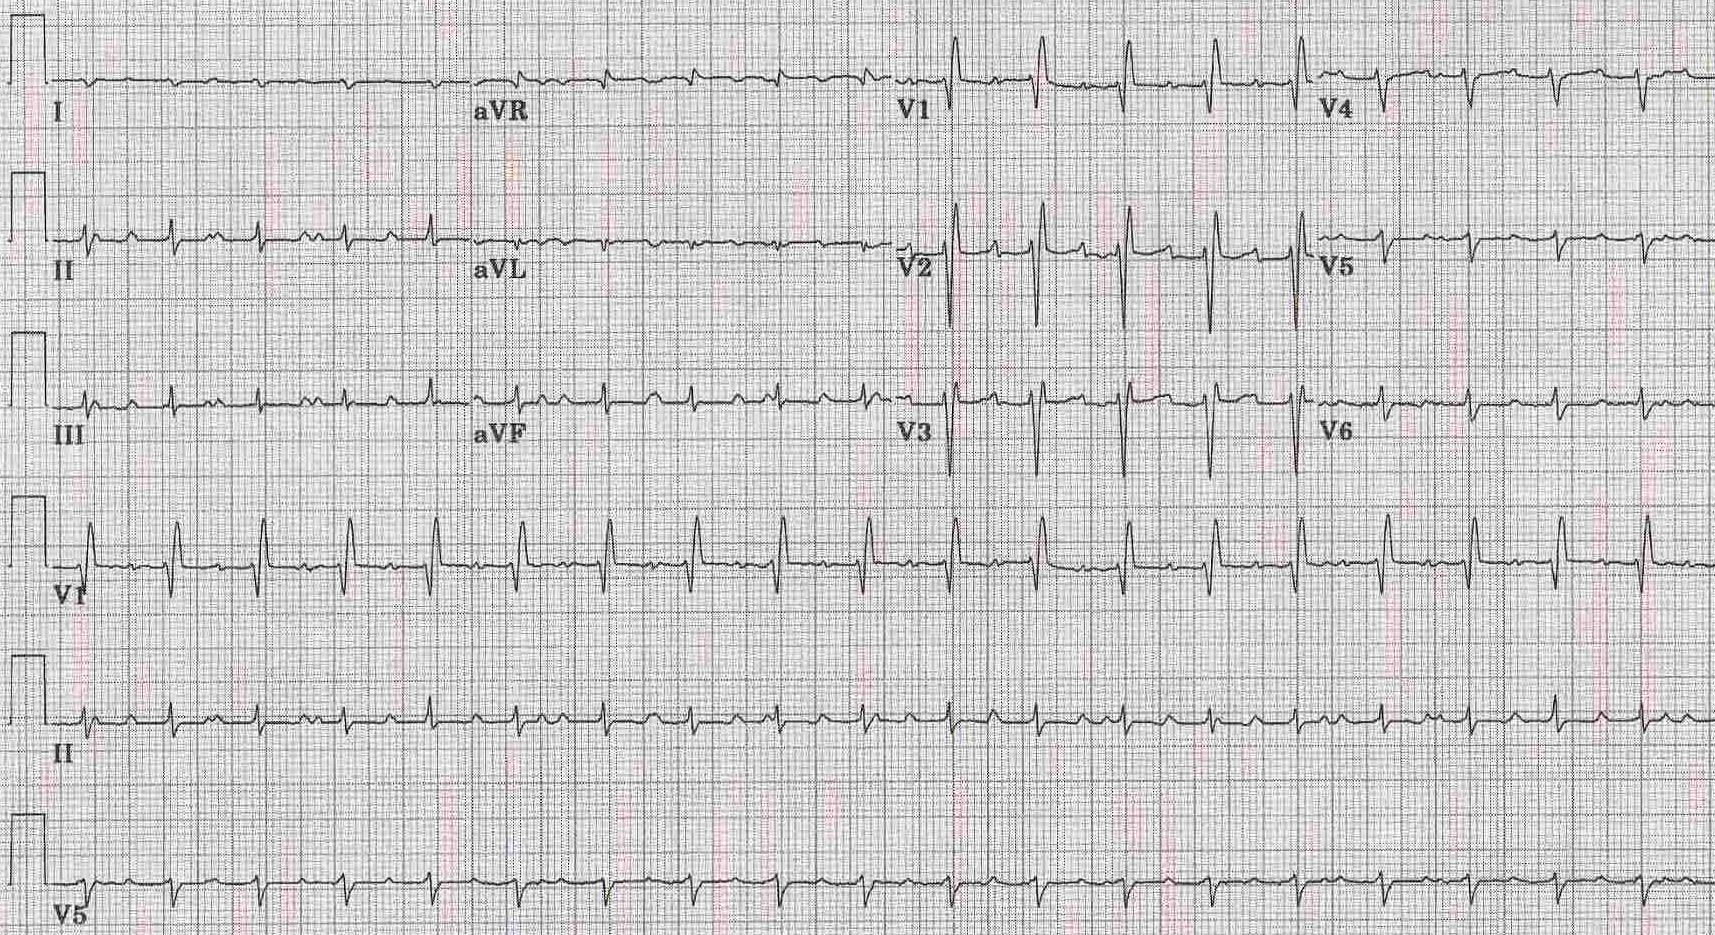 12 lead EKG shows accessory atrial activity (better seen in lead II at the end of the first complex in the middle between the second and third complex and after the third complex) due to some of the original sinus node still remains in addition to the donor sinus node after a cardiac transplant. Because of a suture line in the right atrium the ectopic atrial rhythm rarely conducts to the AV node. Right axis deviation and a rSR' which might suggest volume overload RVH also shown.